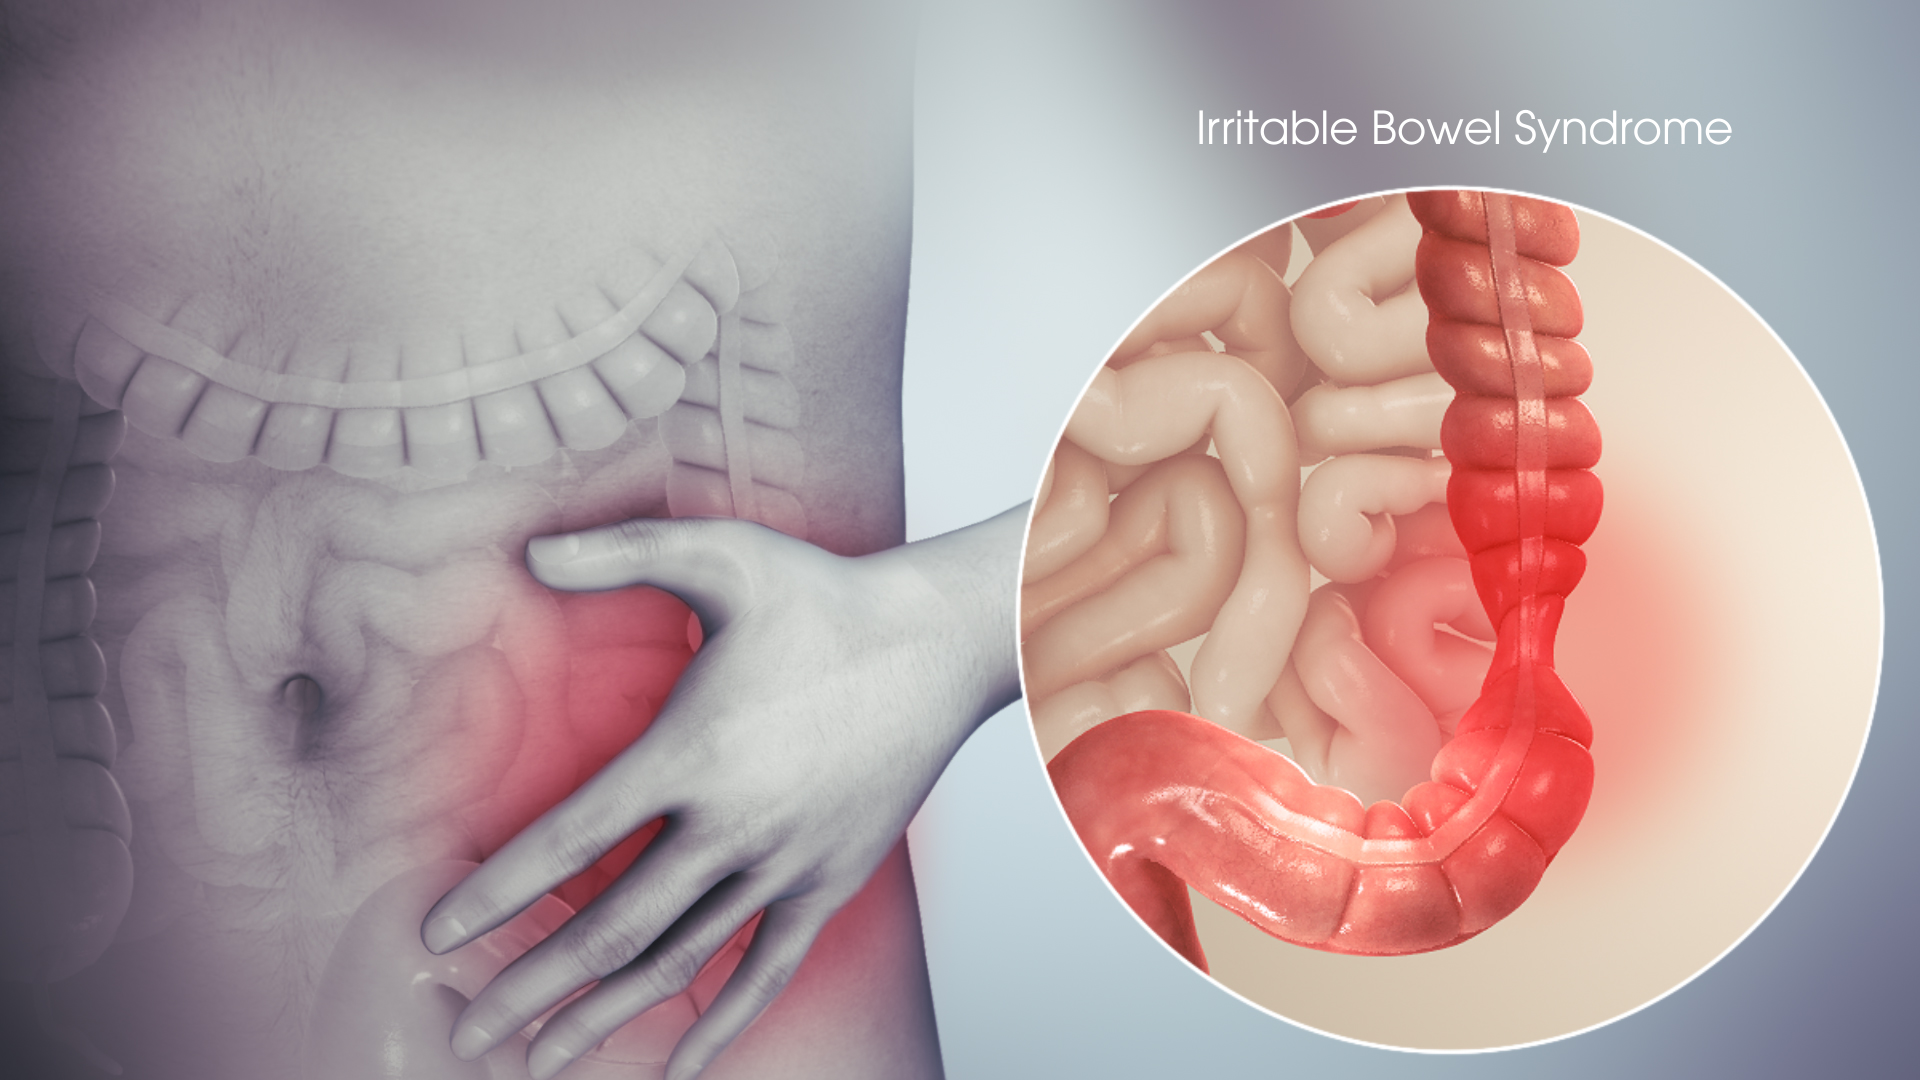 3D Medical Animation showing Irritable Bowel Syndrome